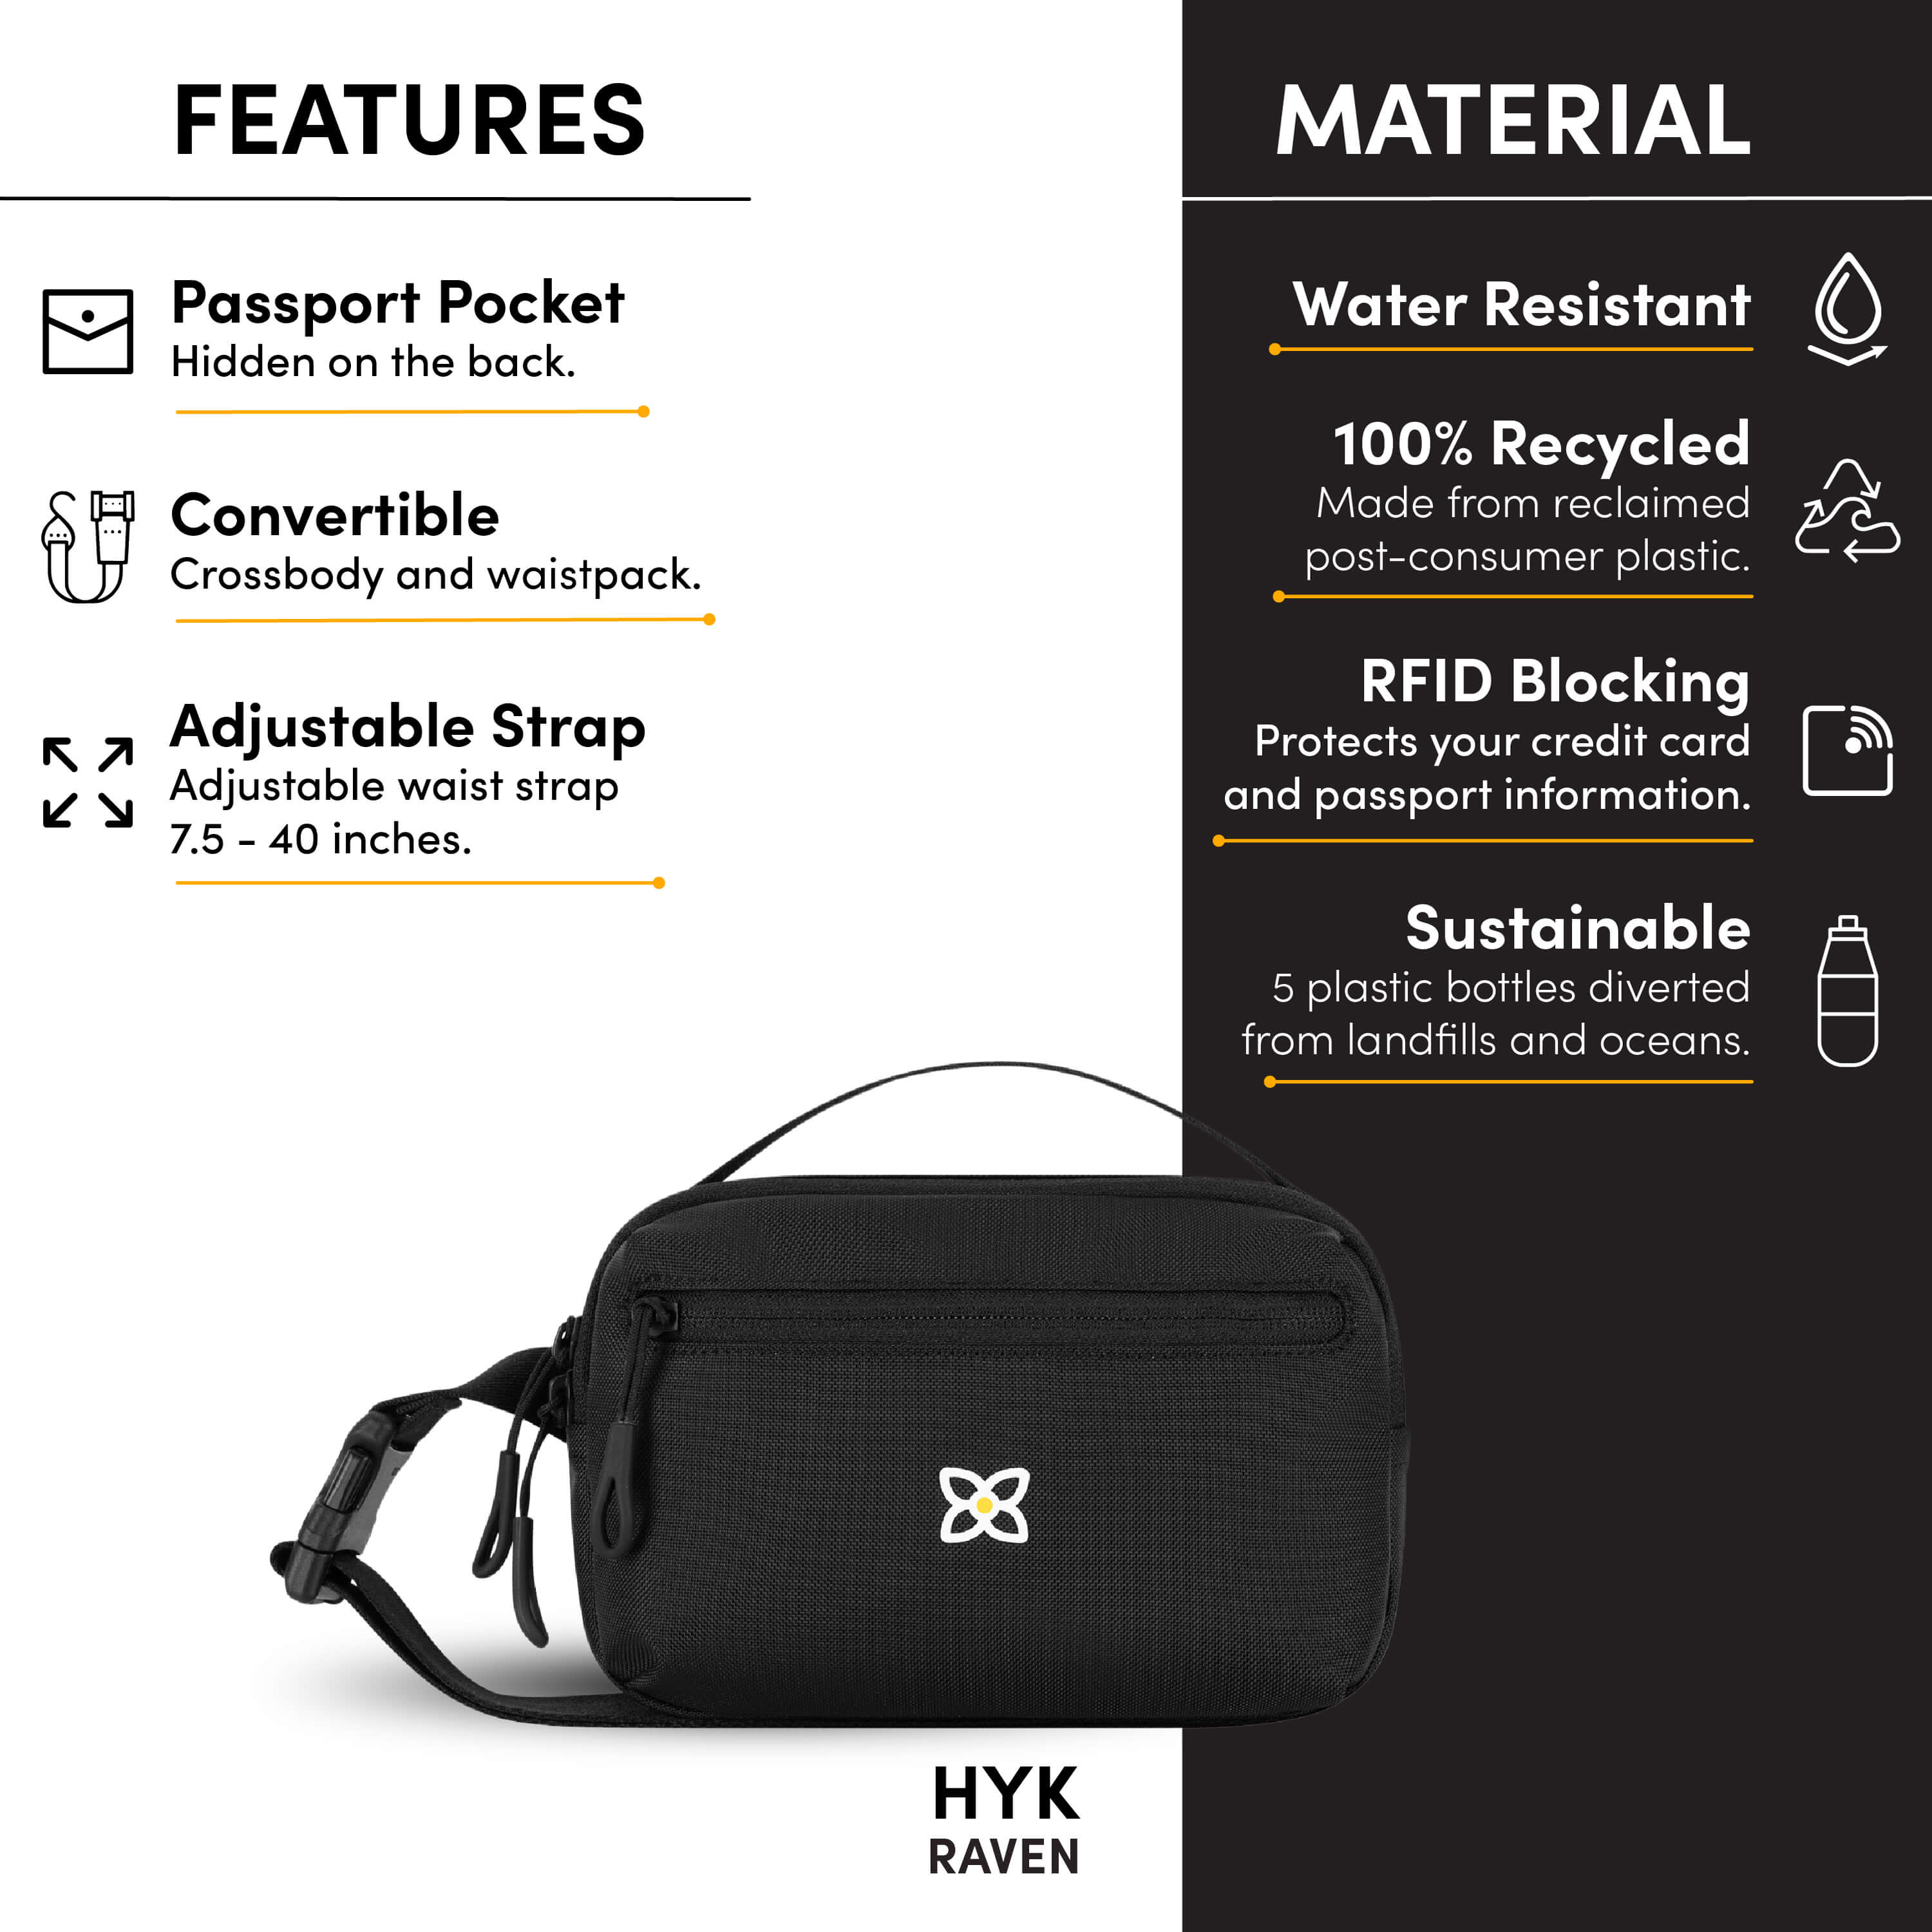 Graphic depicting the following special features of Sherpani mini fanny pack, the Hyk: Passport pocket hidden on the back, convertible bag with dual functionality (belt bag or mini crossbody), adjustable waist strap, water-resistant material, RFID protection and sustainably made from repurposed plastic bottles. 